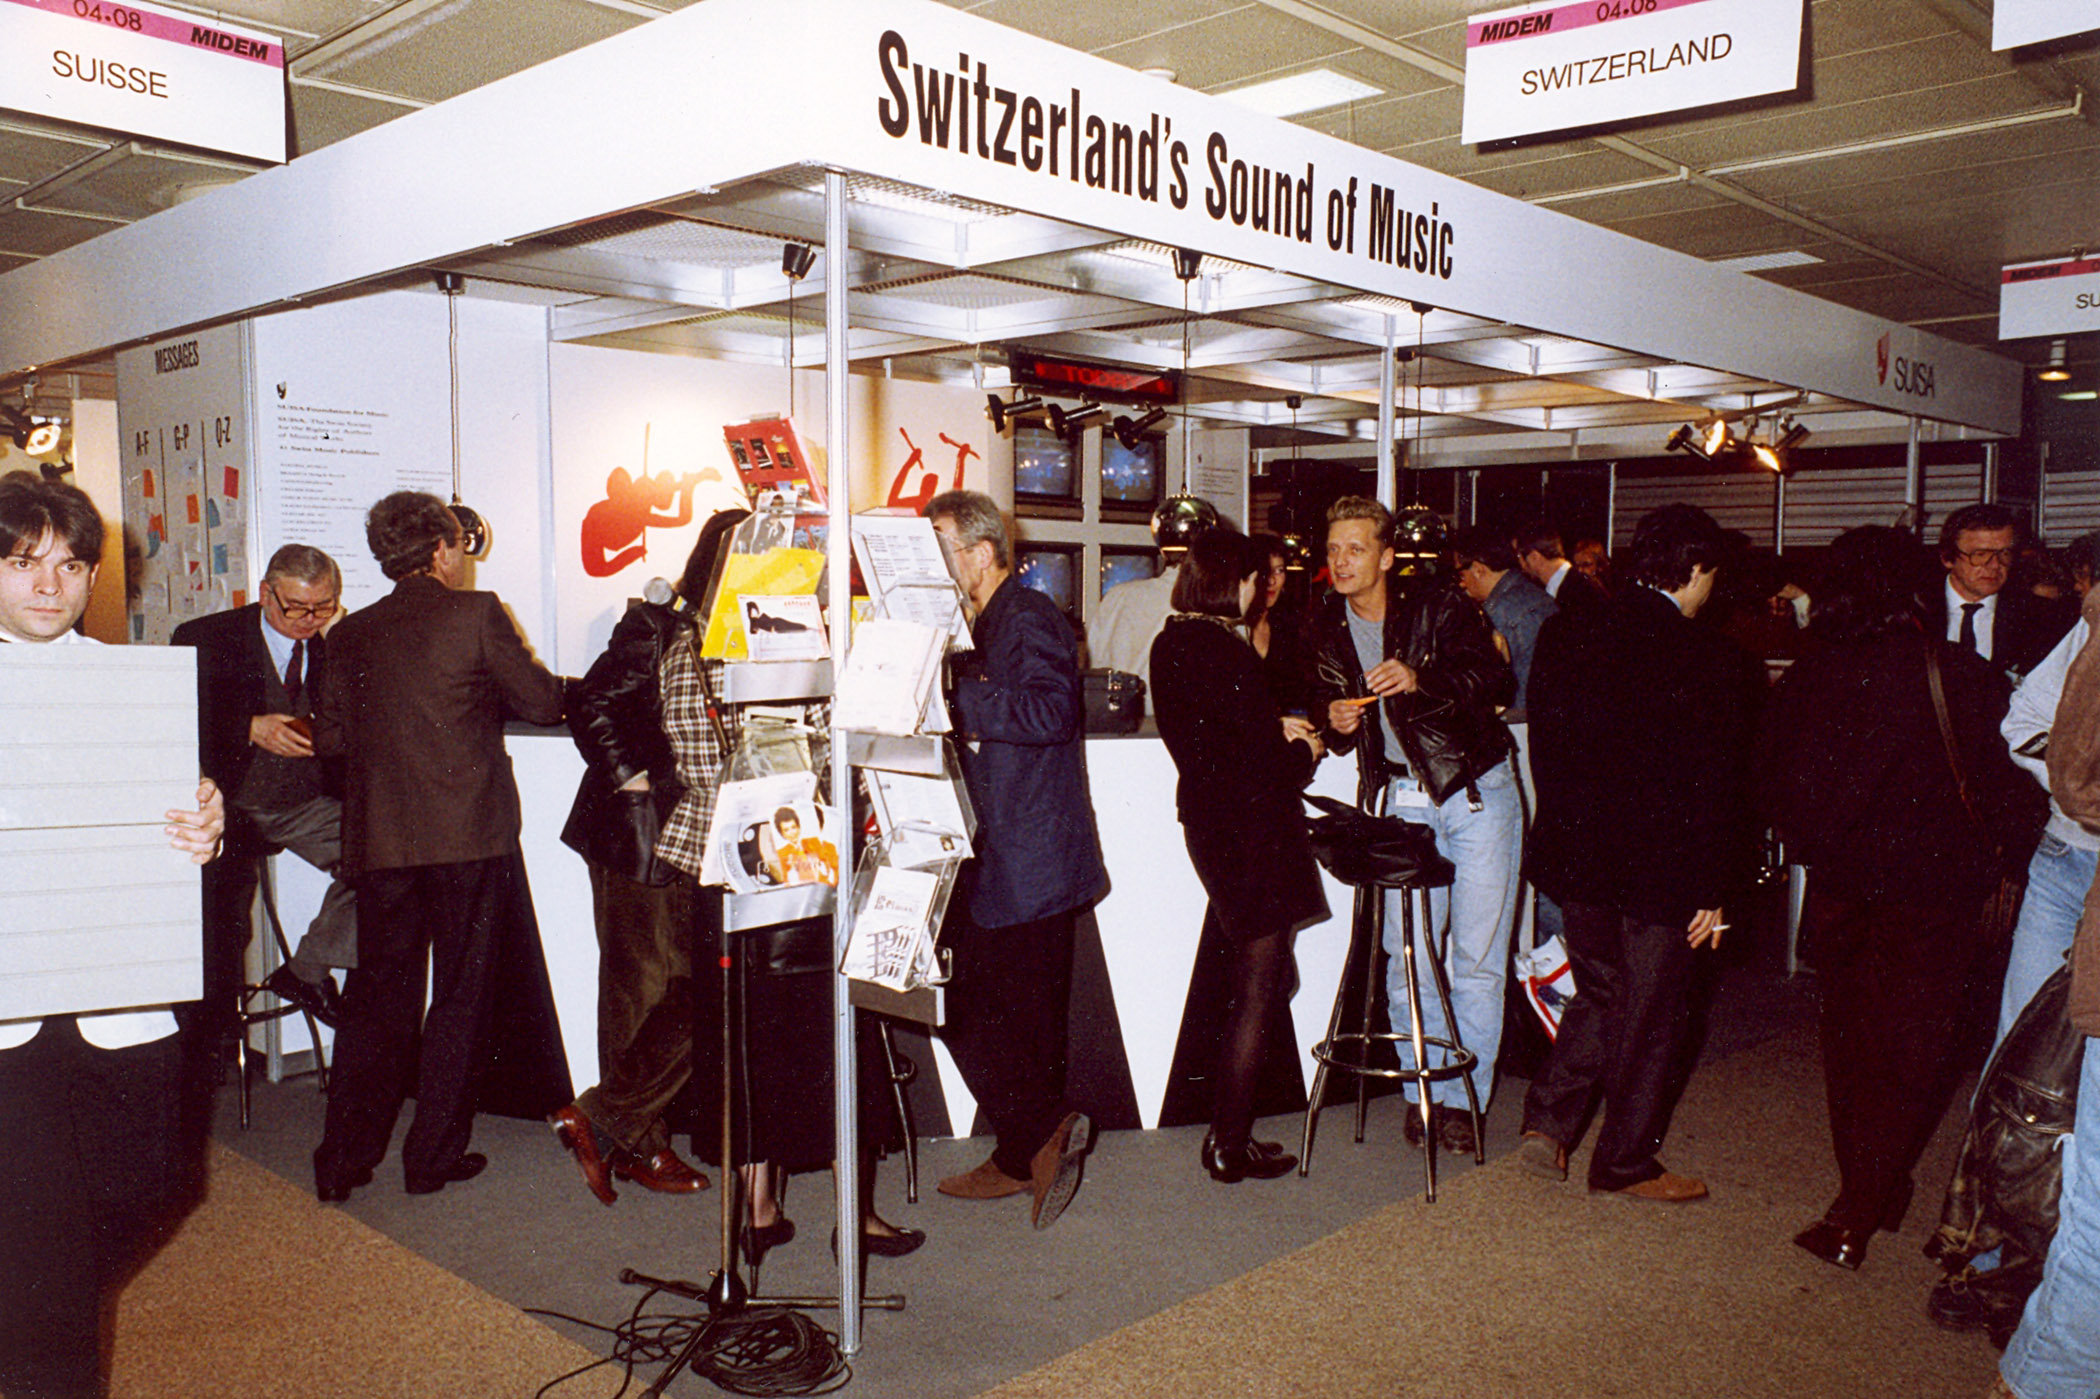 The Swiss presence at the 1992 Music Fair